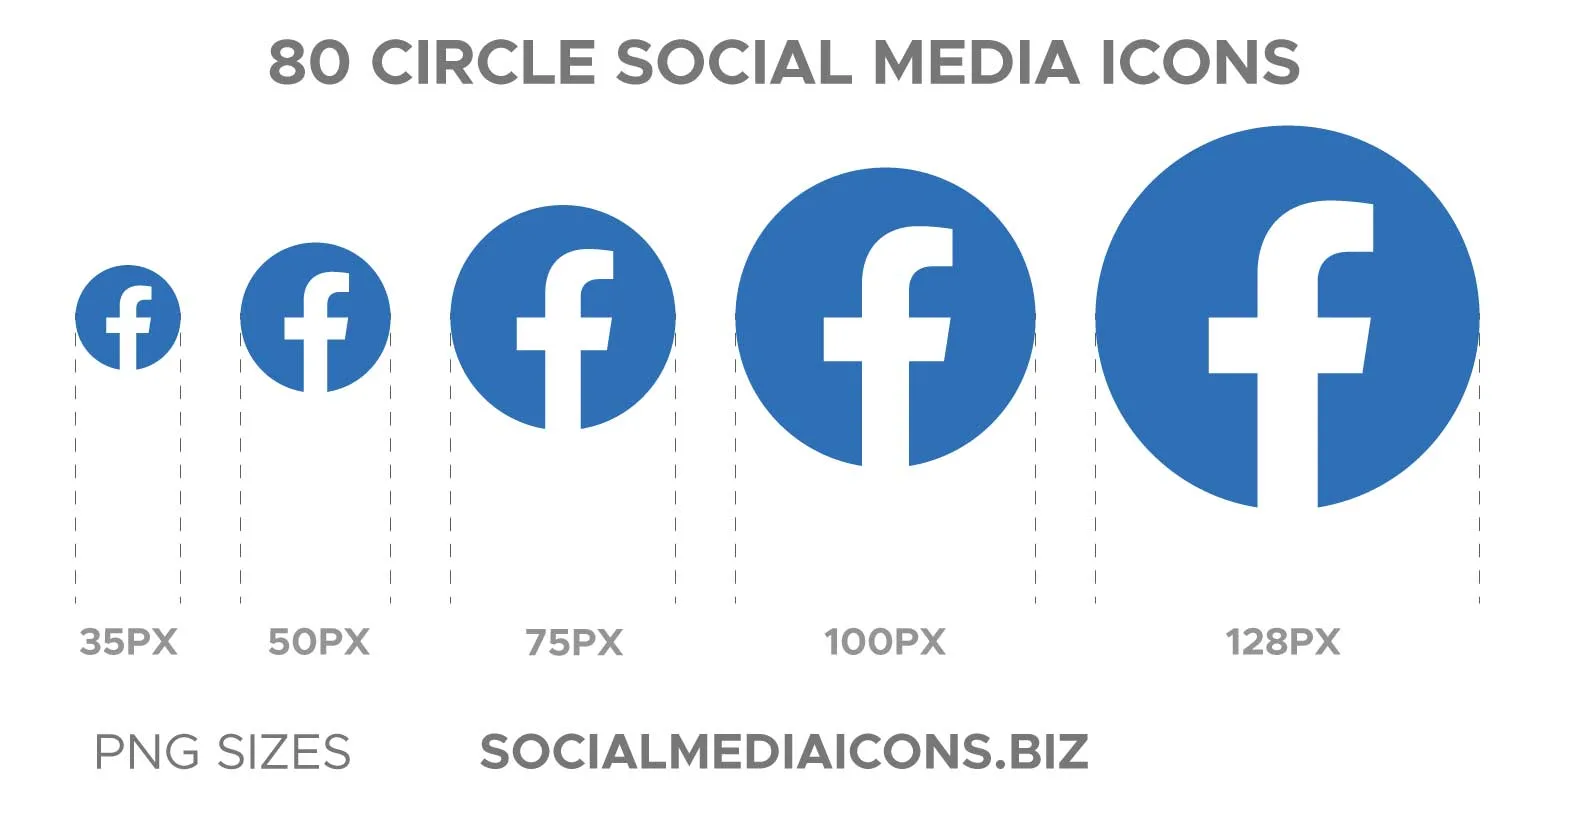 Circle social media icons in 5 png sizes